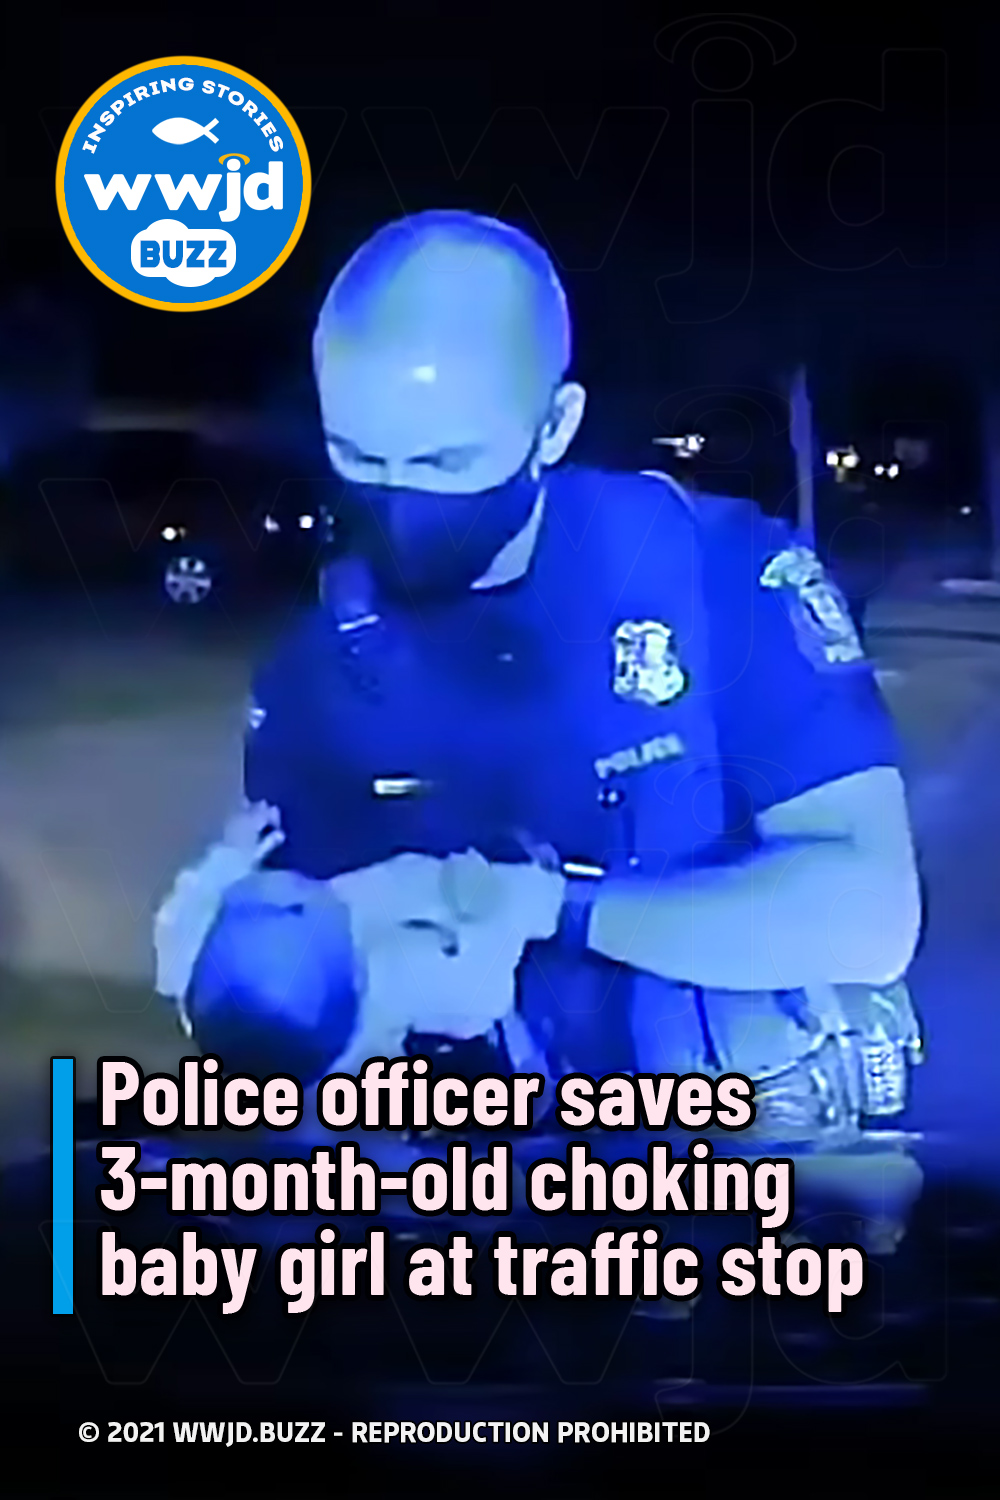 Police officer saves 3-month-old choking baby girl at traffic stop